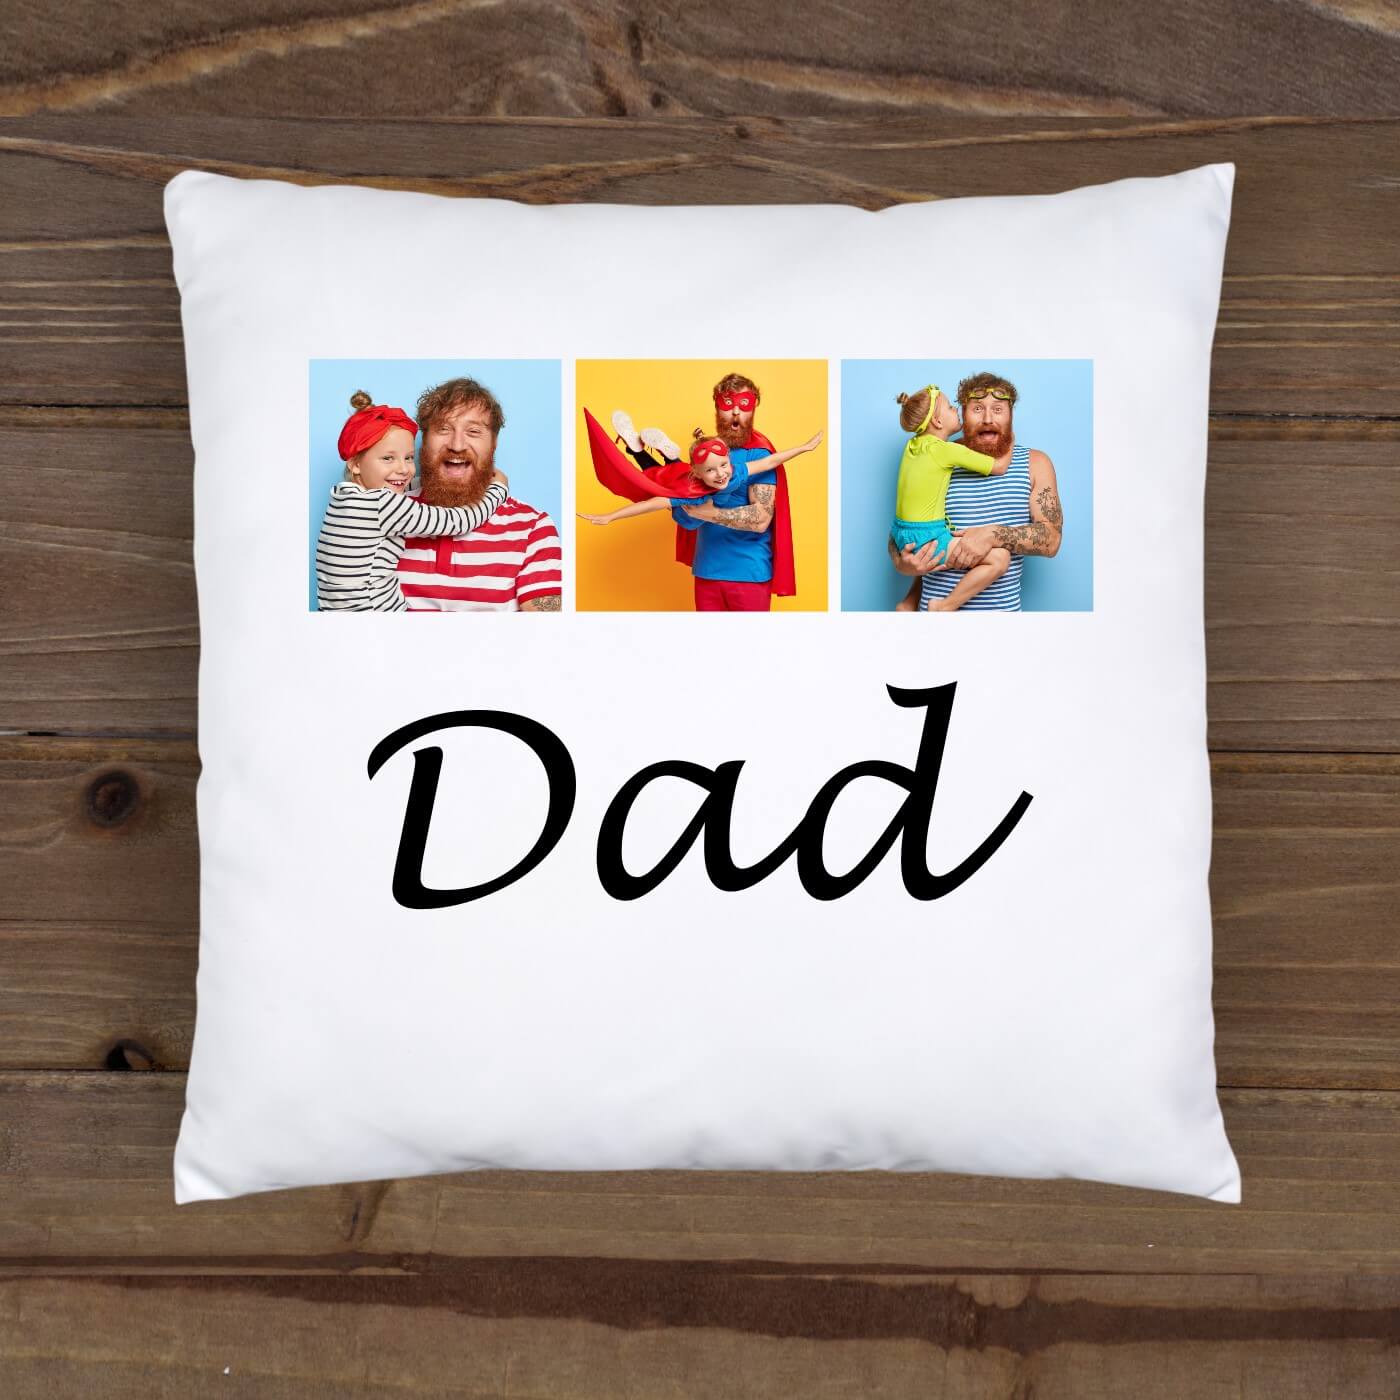 Personalised Cushion Cover - DAD